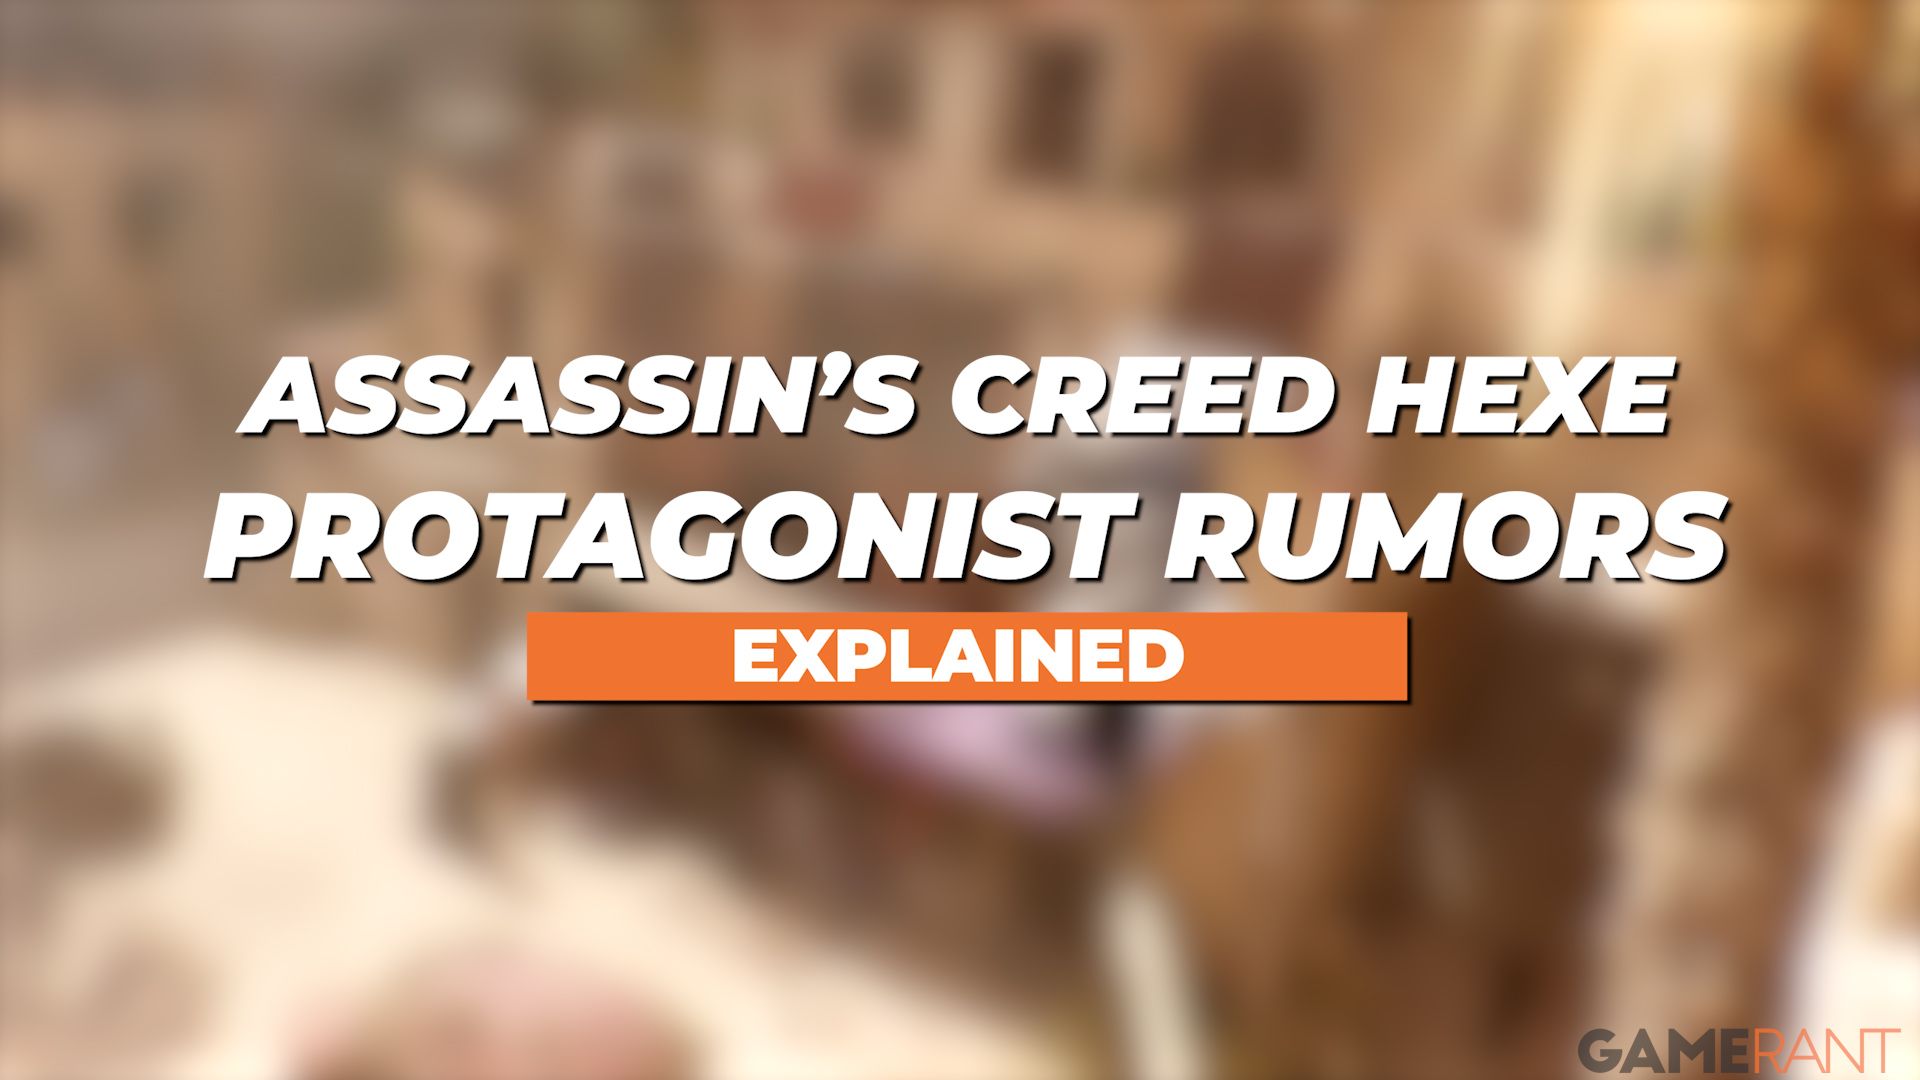 Assassin’s Creed Hexe Protagonist Rumors Explained